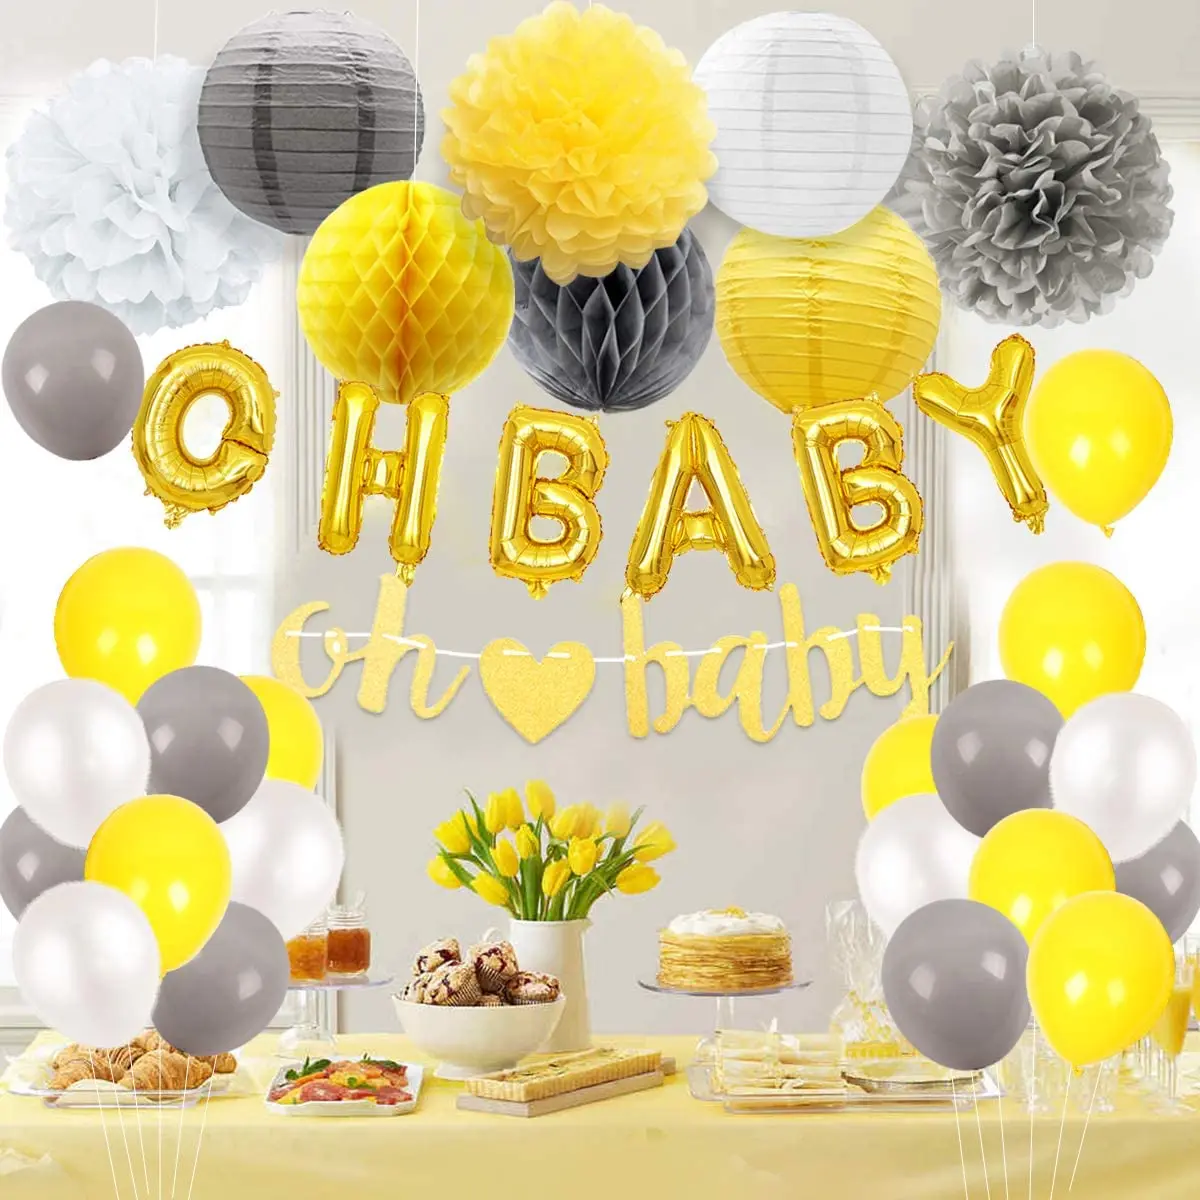 

JOYMEMO Baby Shower Decorations for Boy or Girl Yellow and Gray Balloons Pom Poms Paper Lanterns Oh Baby Banner Garland